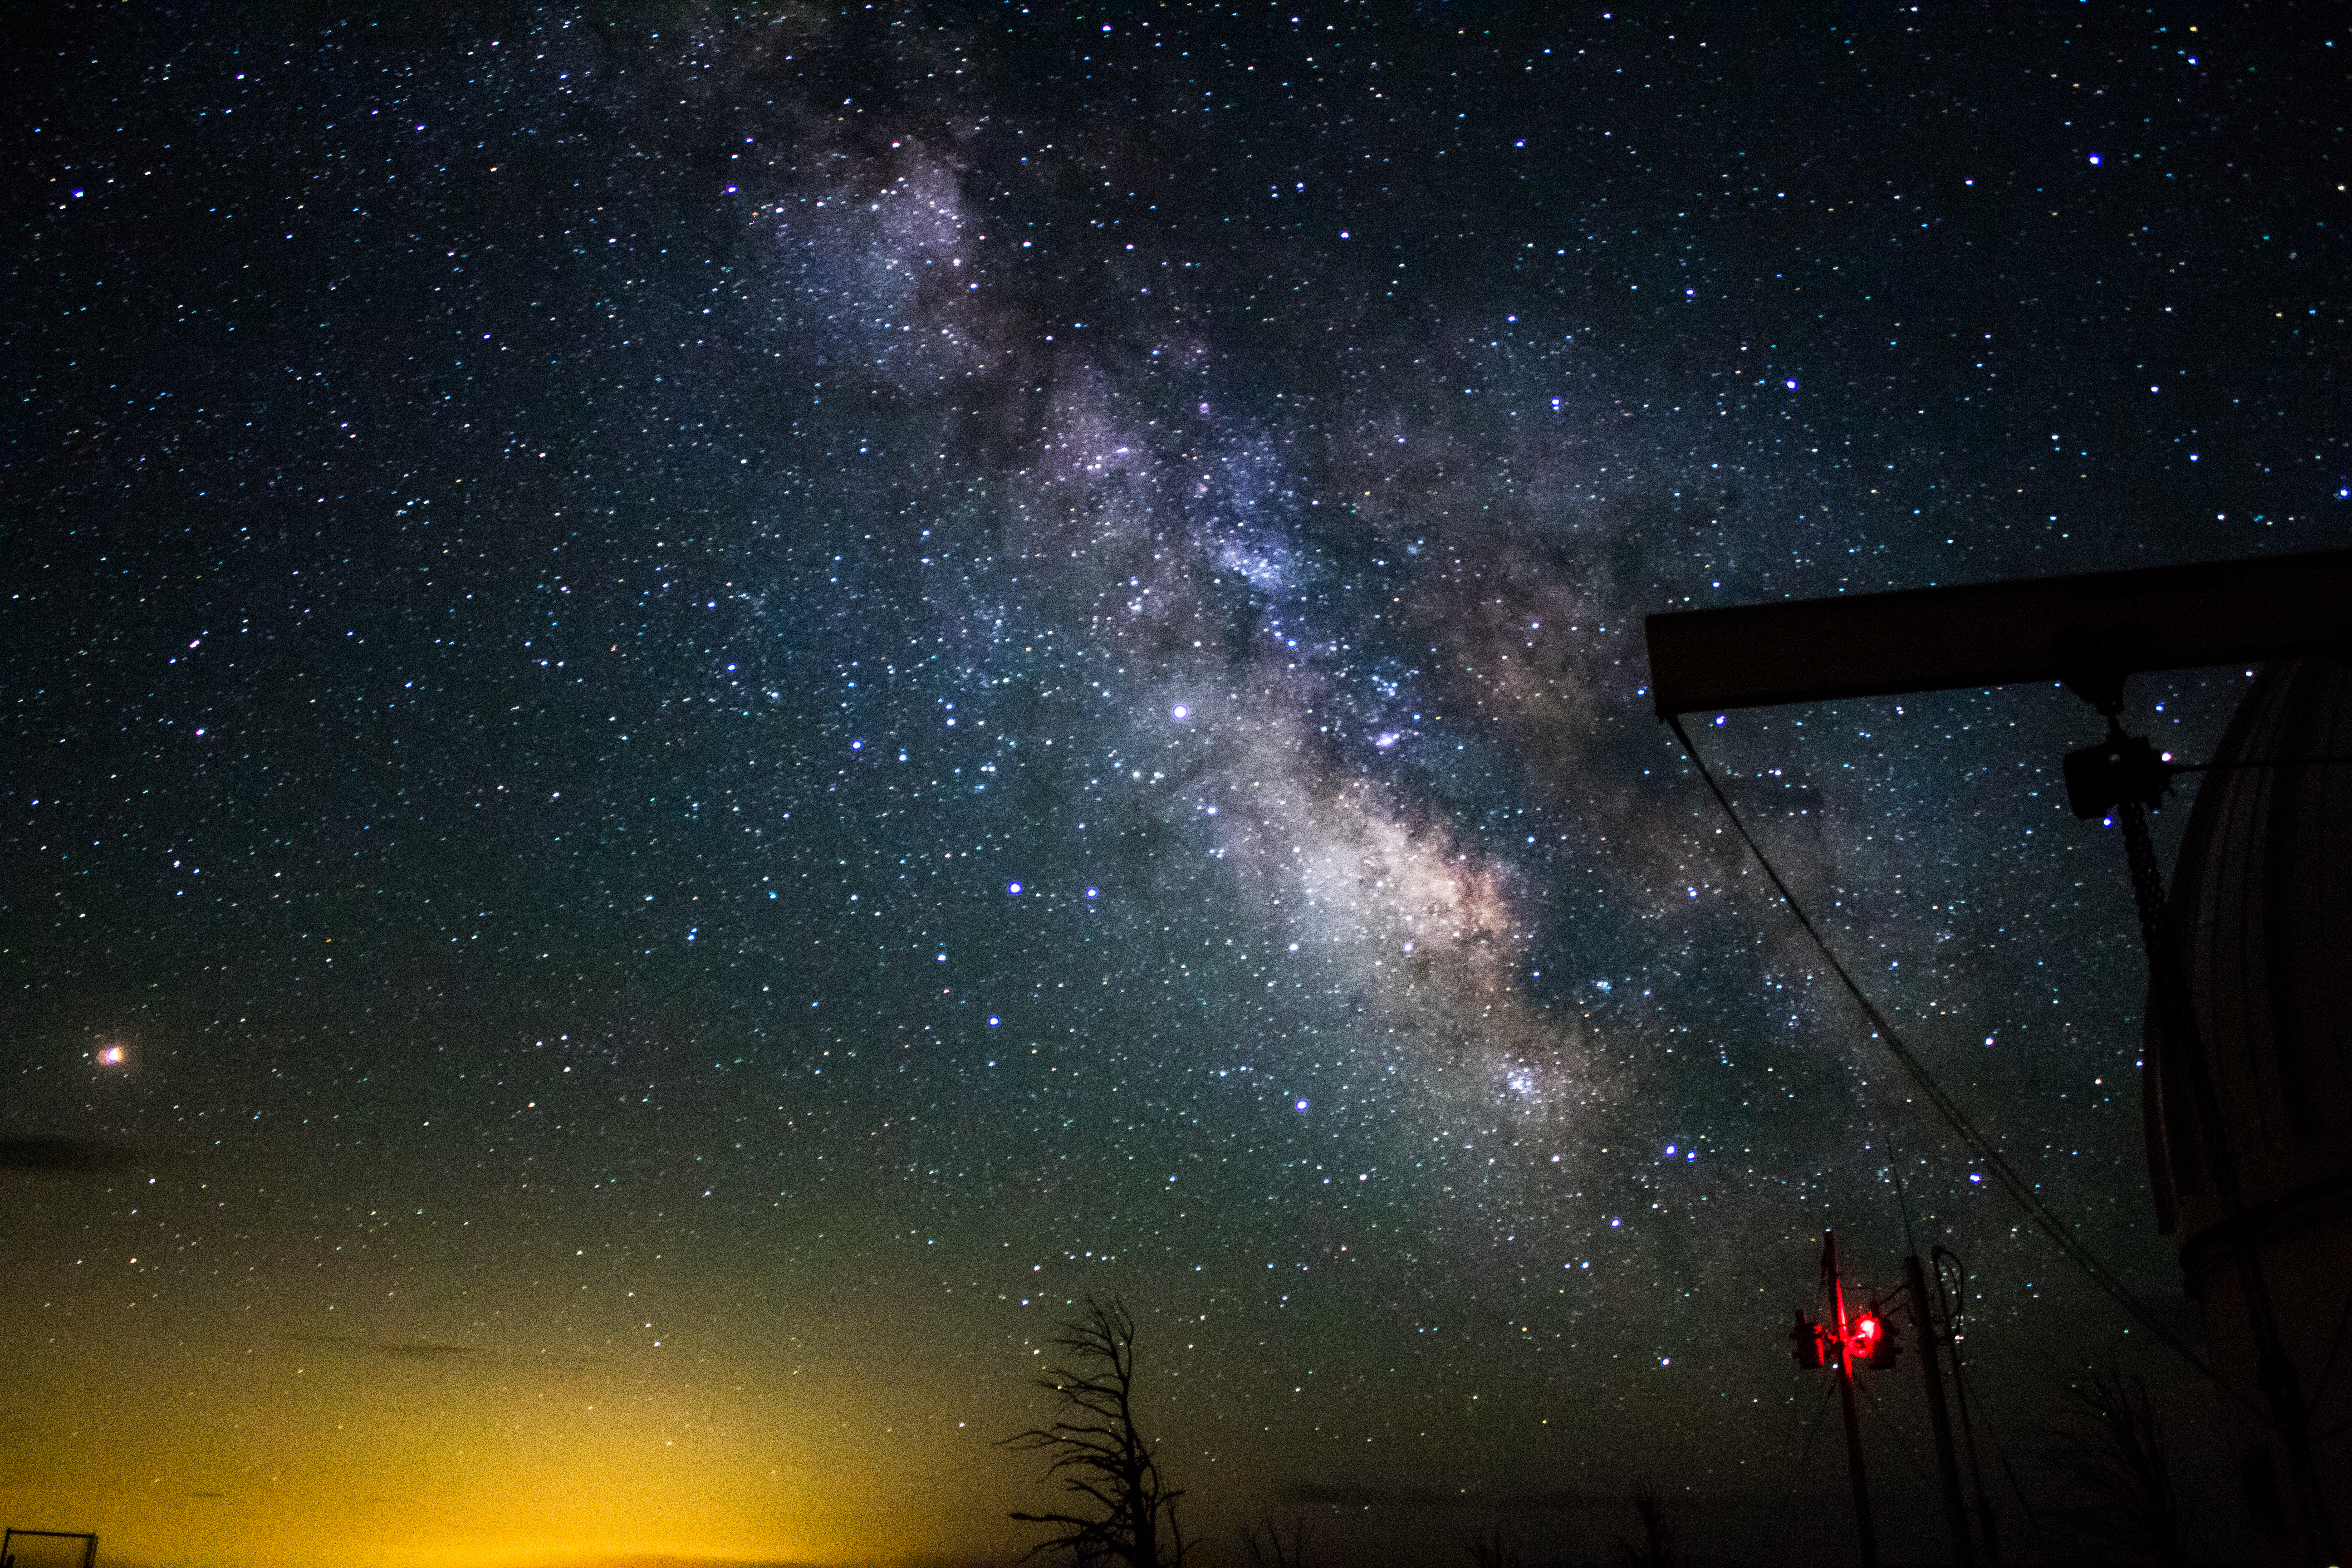 Milky Way over the Wyoming Infrared Observatory.